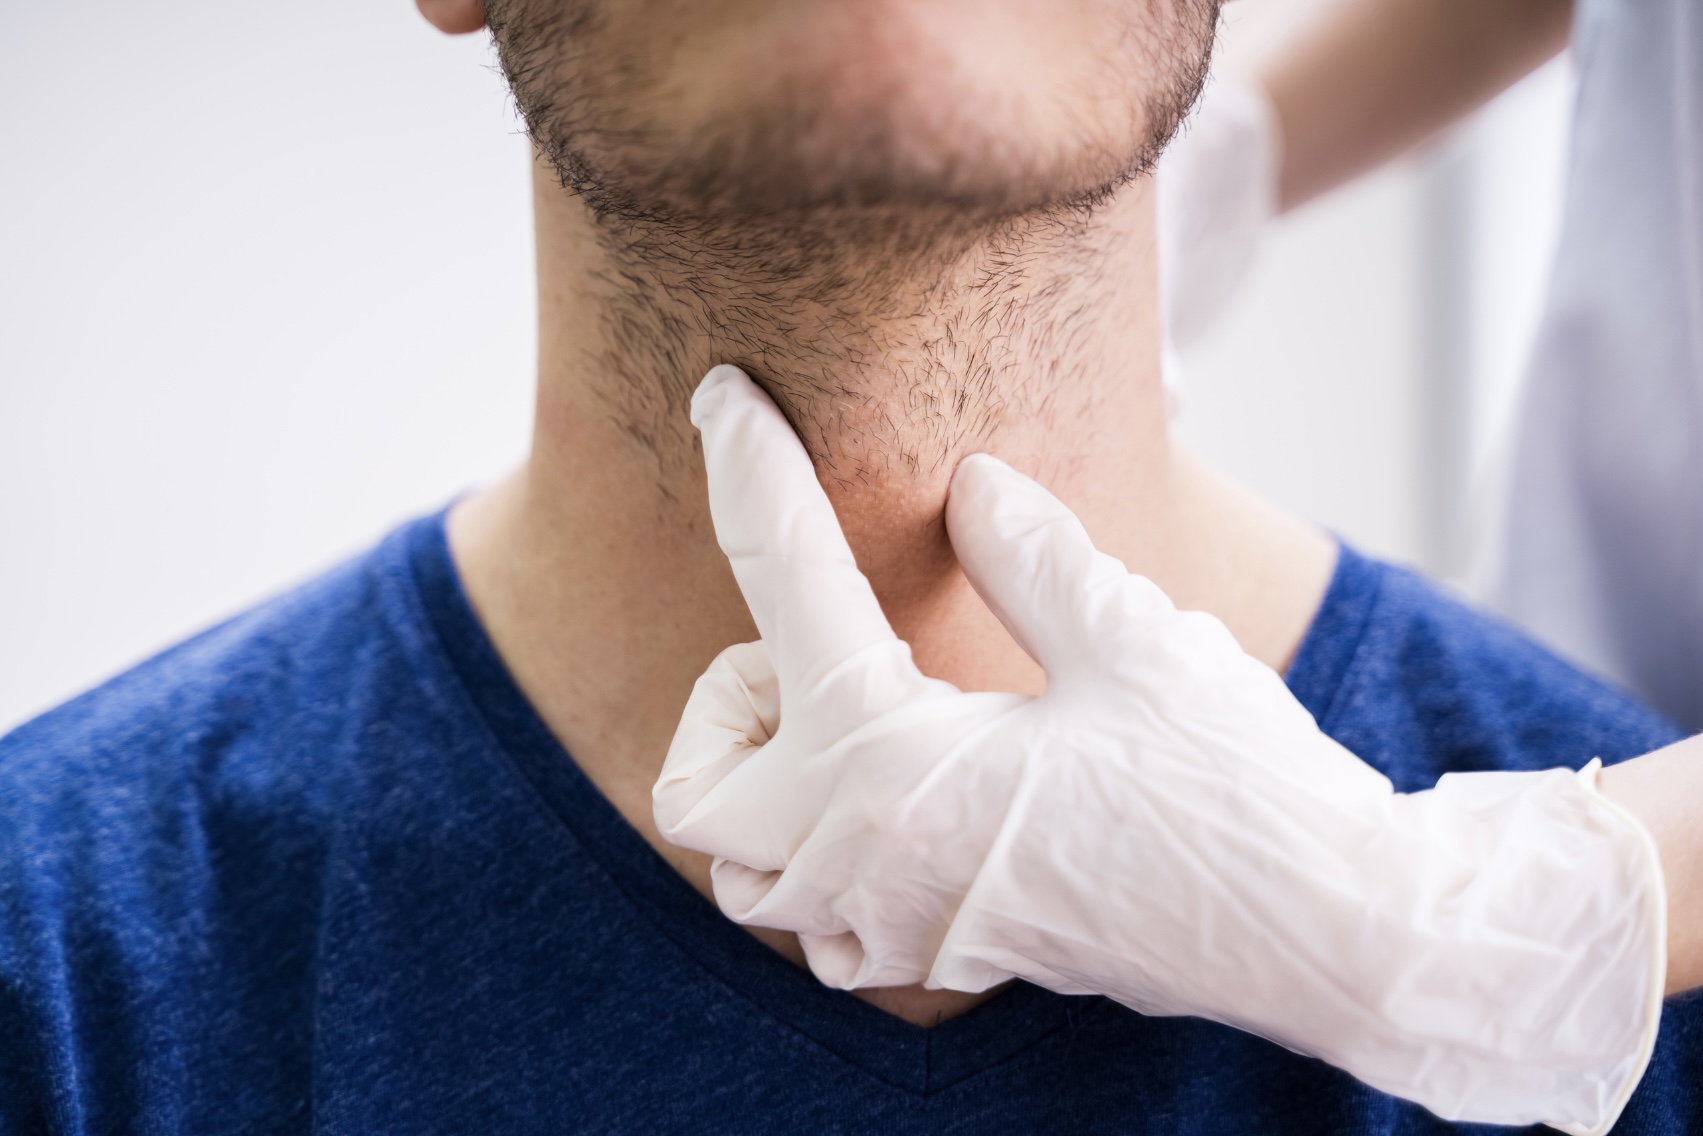 thyroid gland examination of patient with thyroid cancer